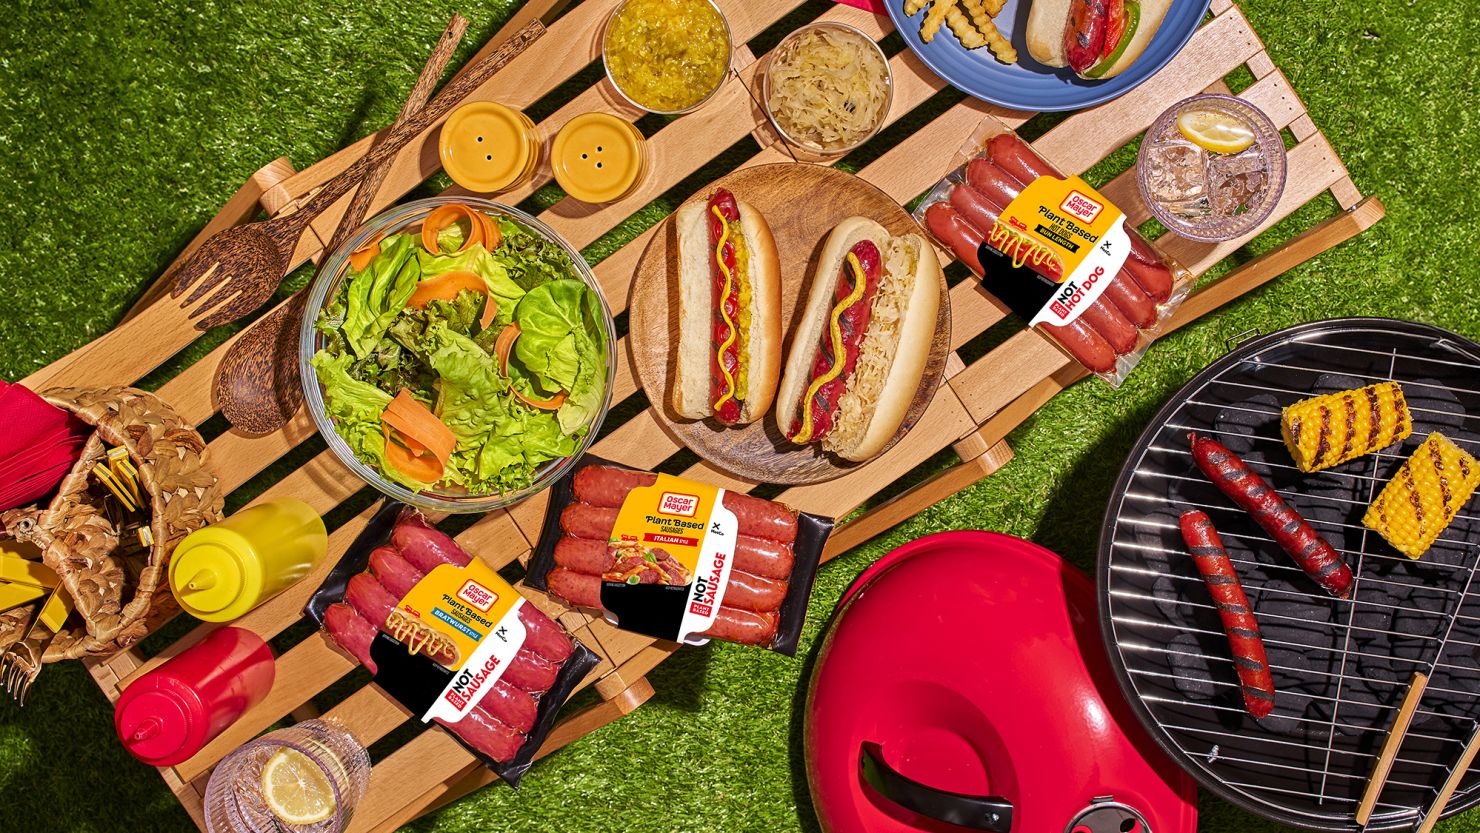 Oscar Mayer is adding plant-based hot dogs and sausages to its lineup.